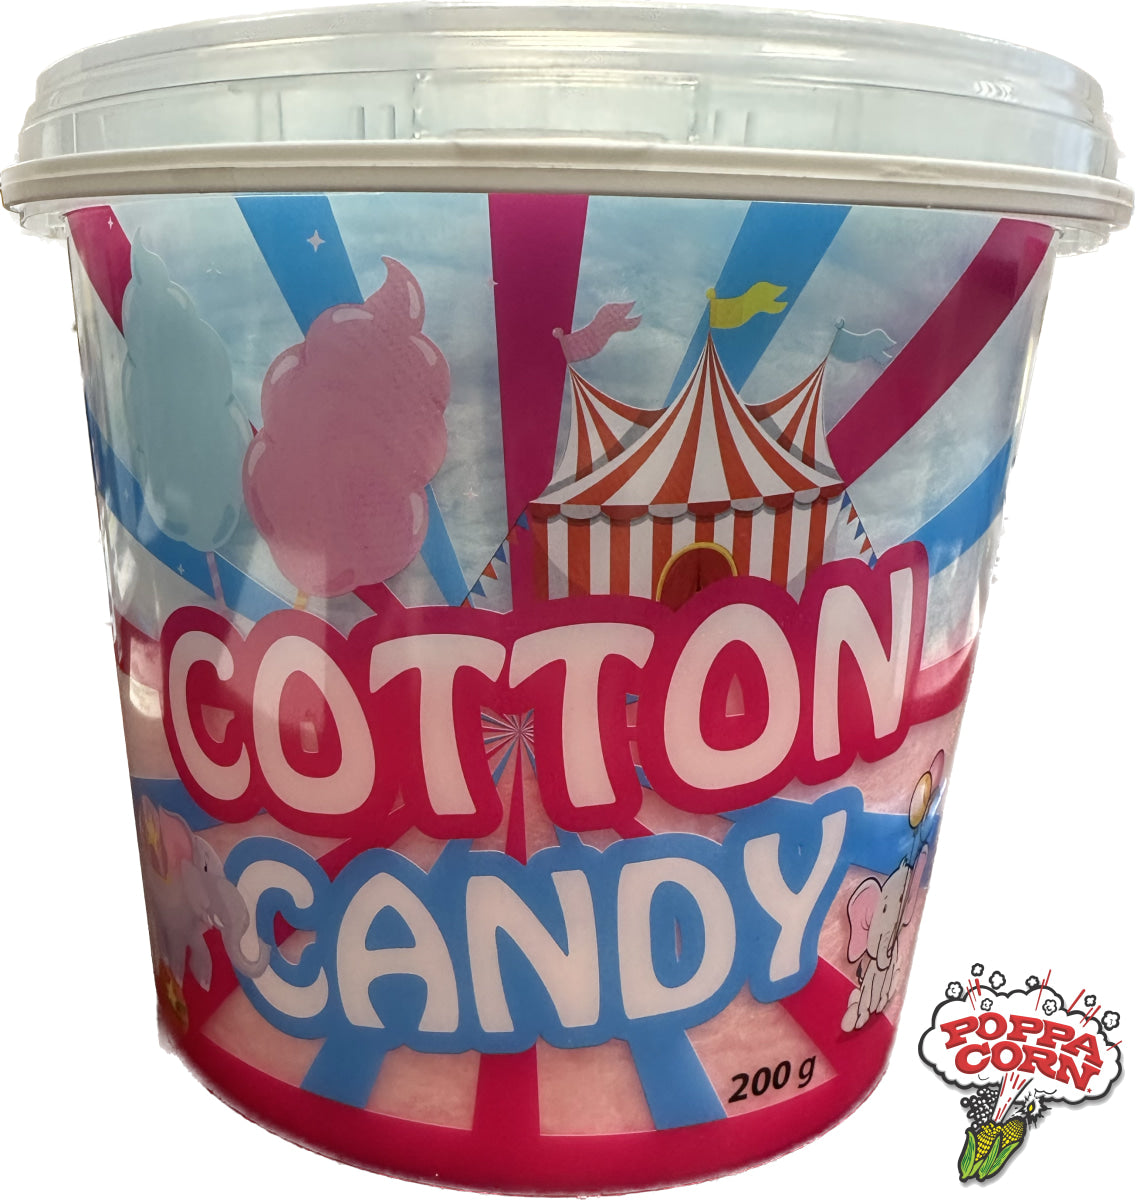 Poppa Corn's Cotton Candy Tubs - Pre-Packaged Candy Floss Tubs - 200g x 24 - S200 - Poppa Corn Corp